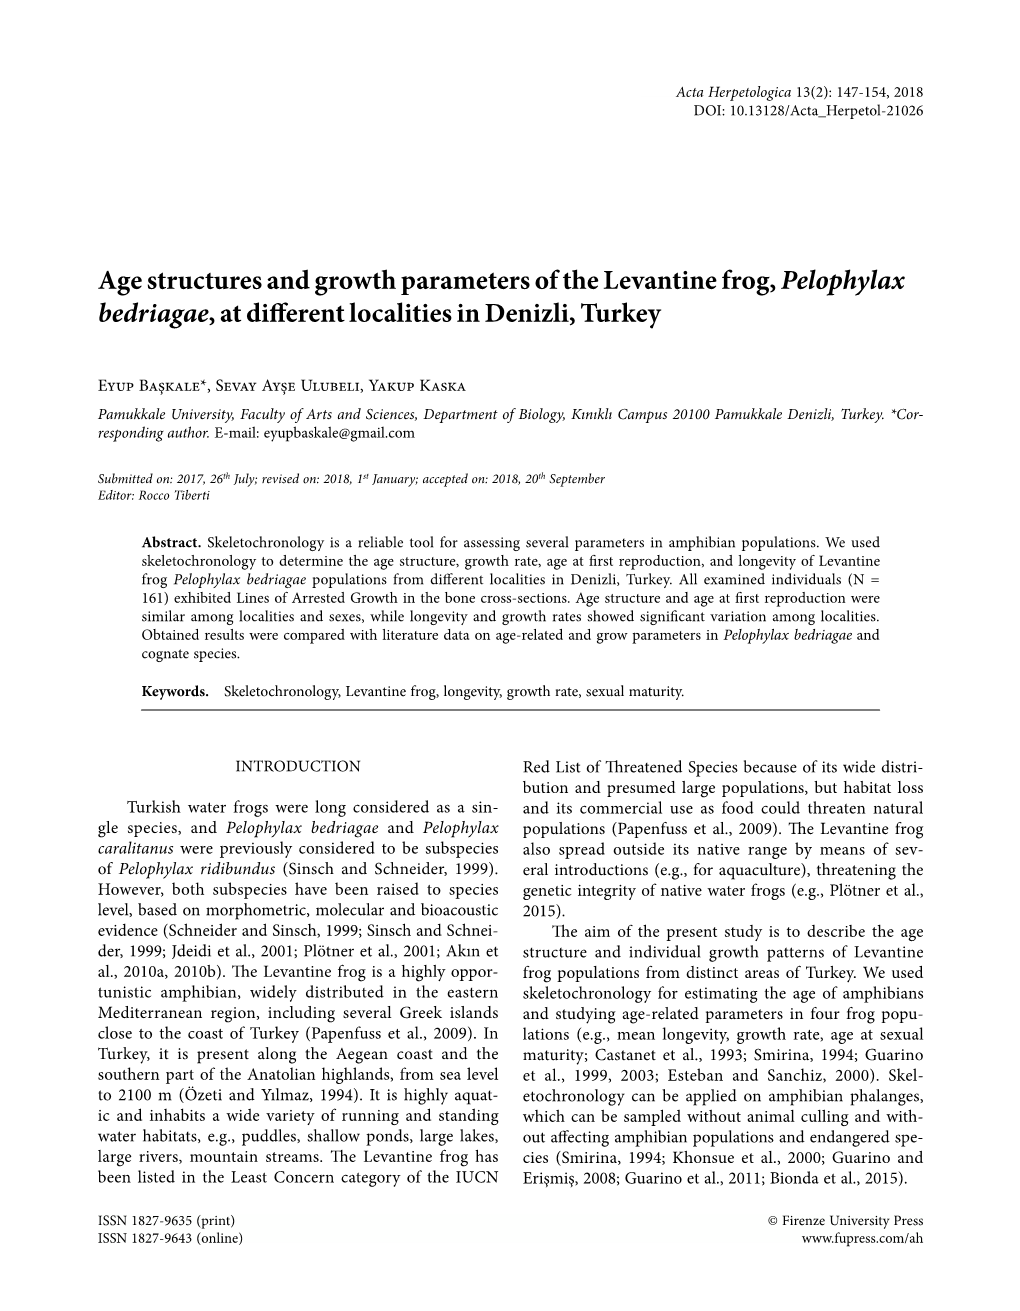 Age Structures and Growth Parameters of the Levantine Frog, Pelophylax Bedriagae, at Different Localities in Denizli, Turkey